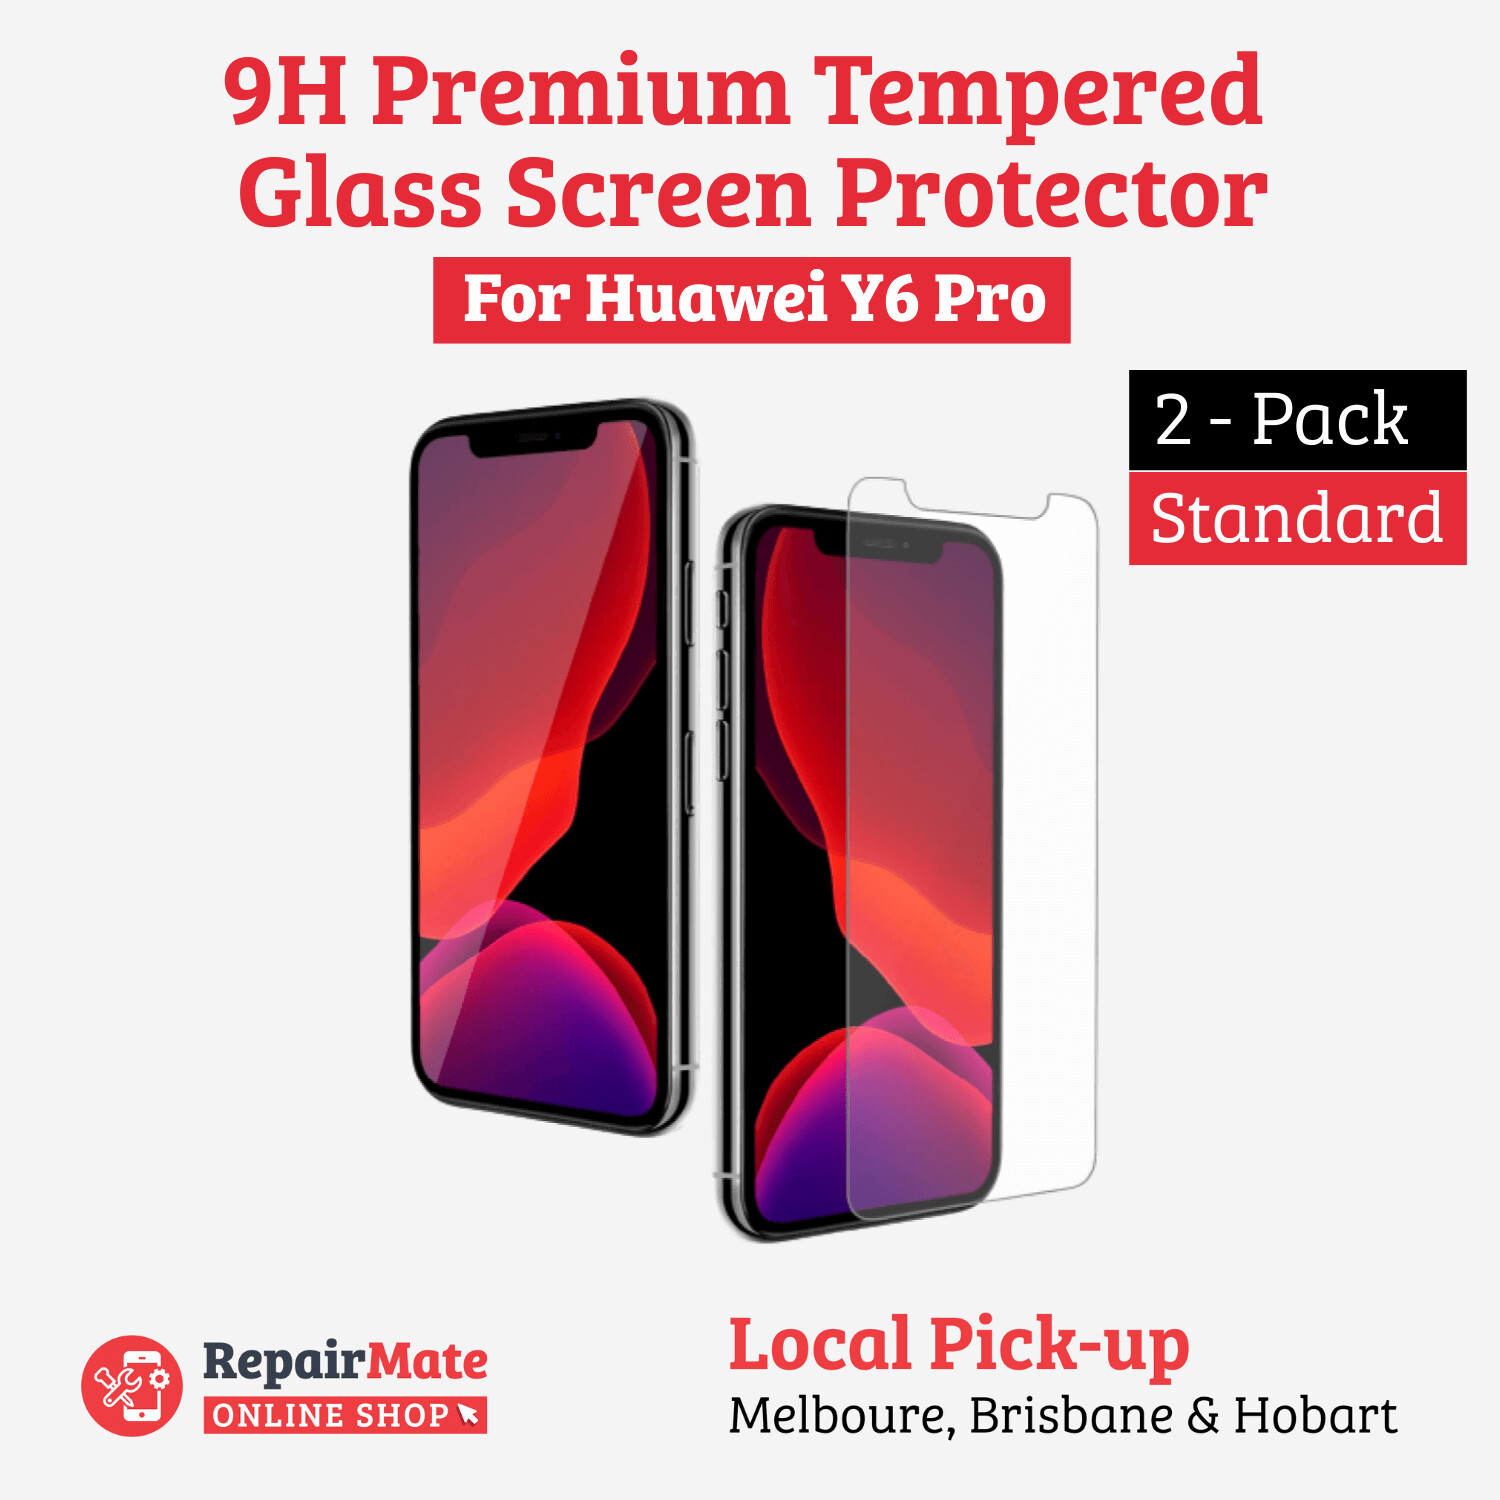 Huawei Y6 Pro 9H Premium Tempered Glass Screen Protector [2 Pack]